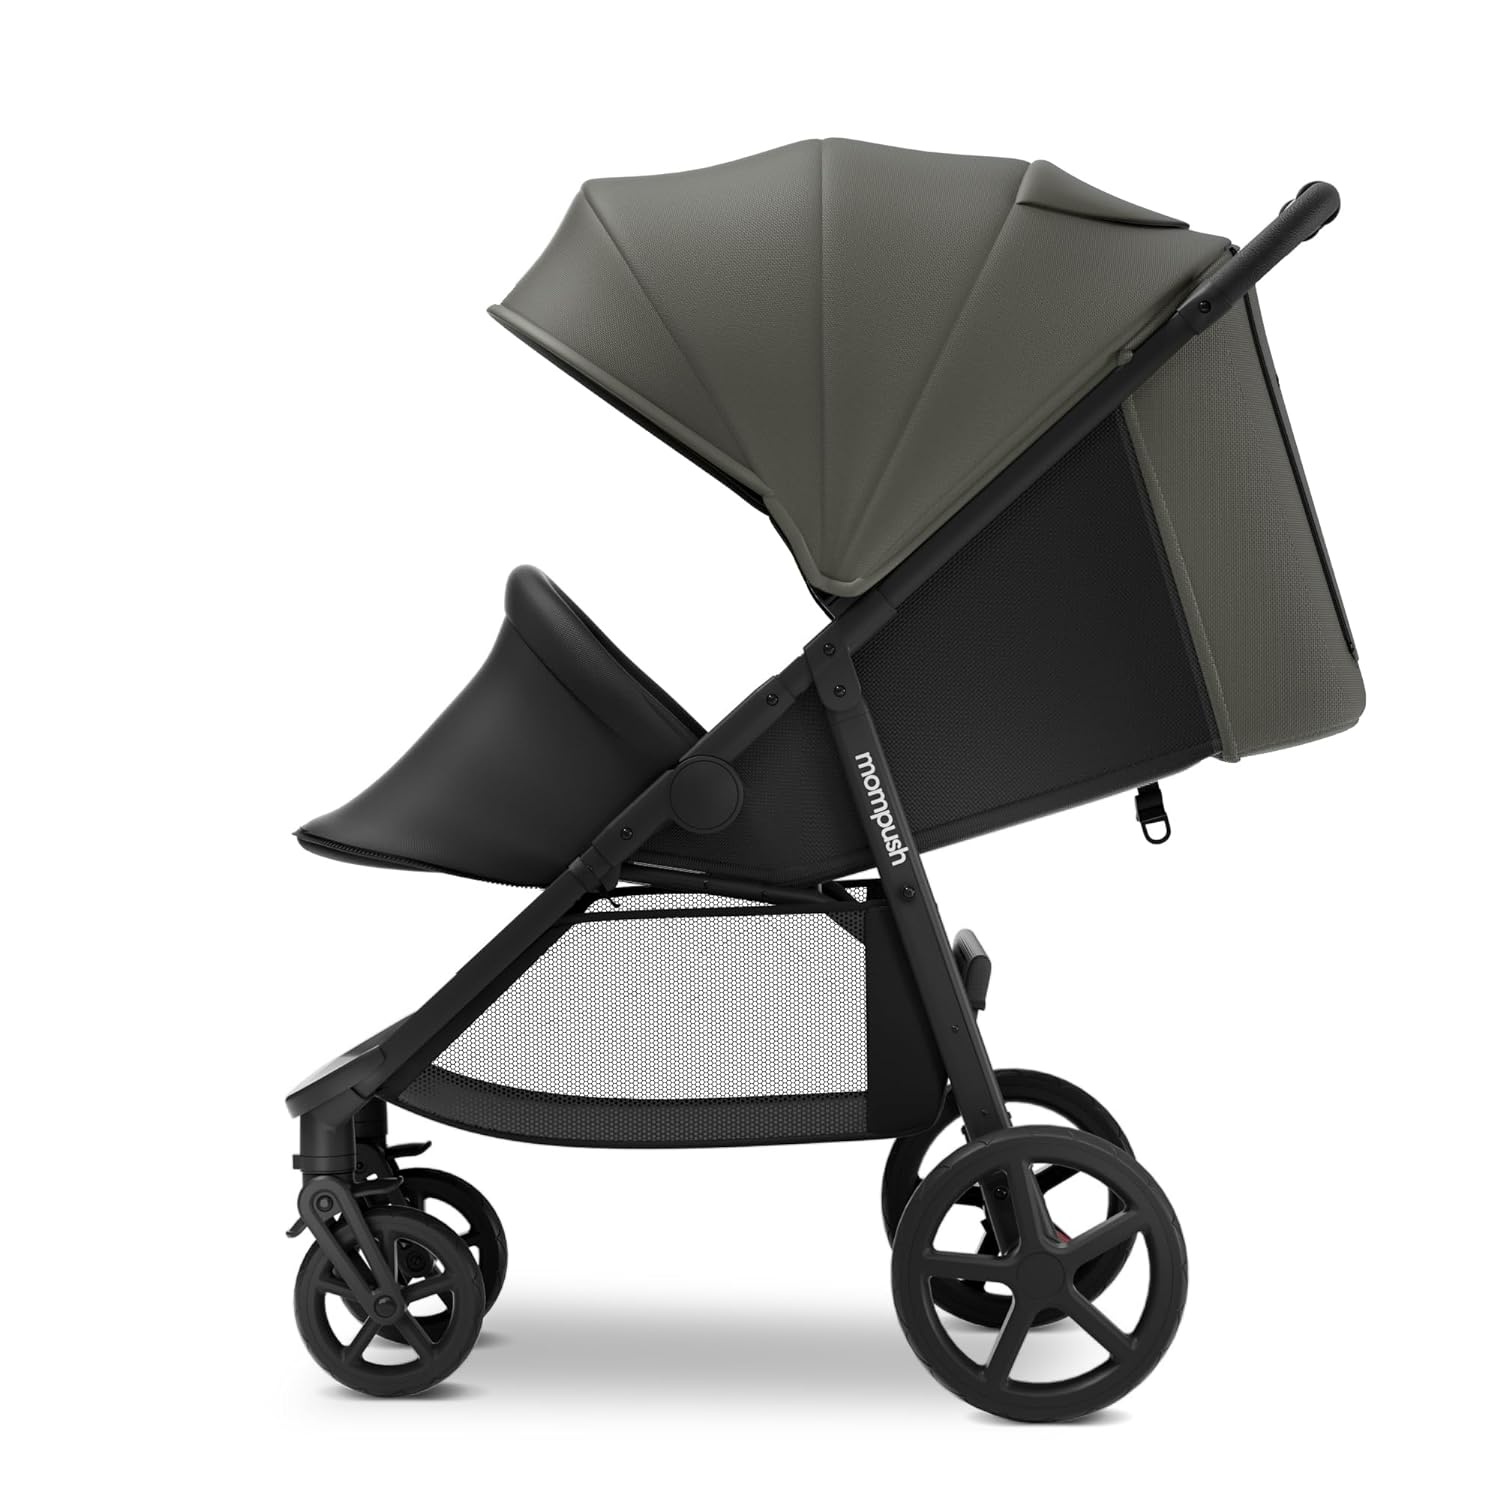 Mompush Nova Baby Stroller, Spacious Seat  Lie-Flat Mode, Toddler Stroller with Large UPF 50+ Canopy, Compact Folding with One Hand, Infant Stroller for Birth to 50 LB